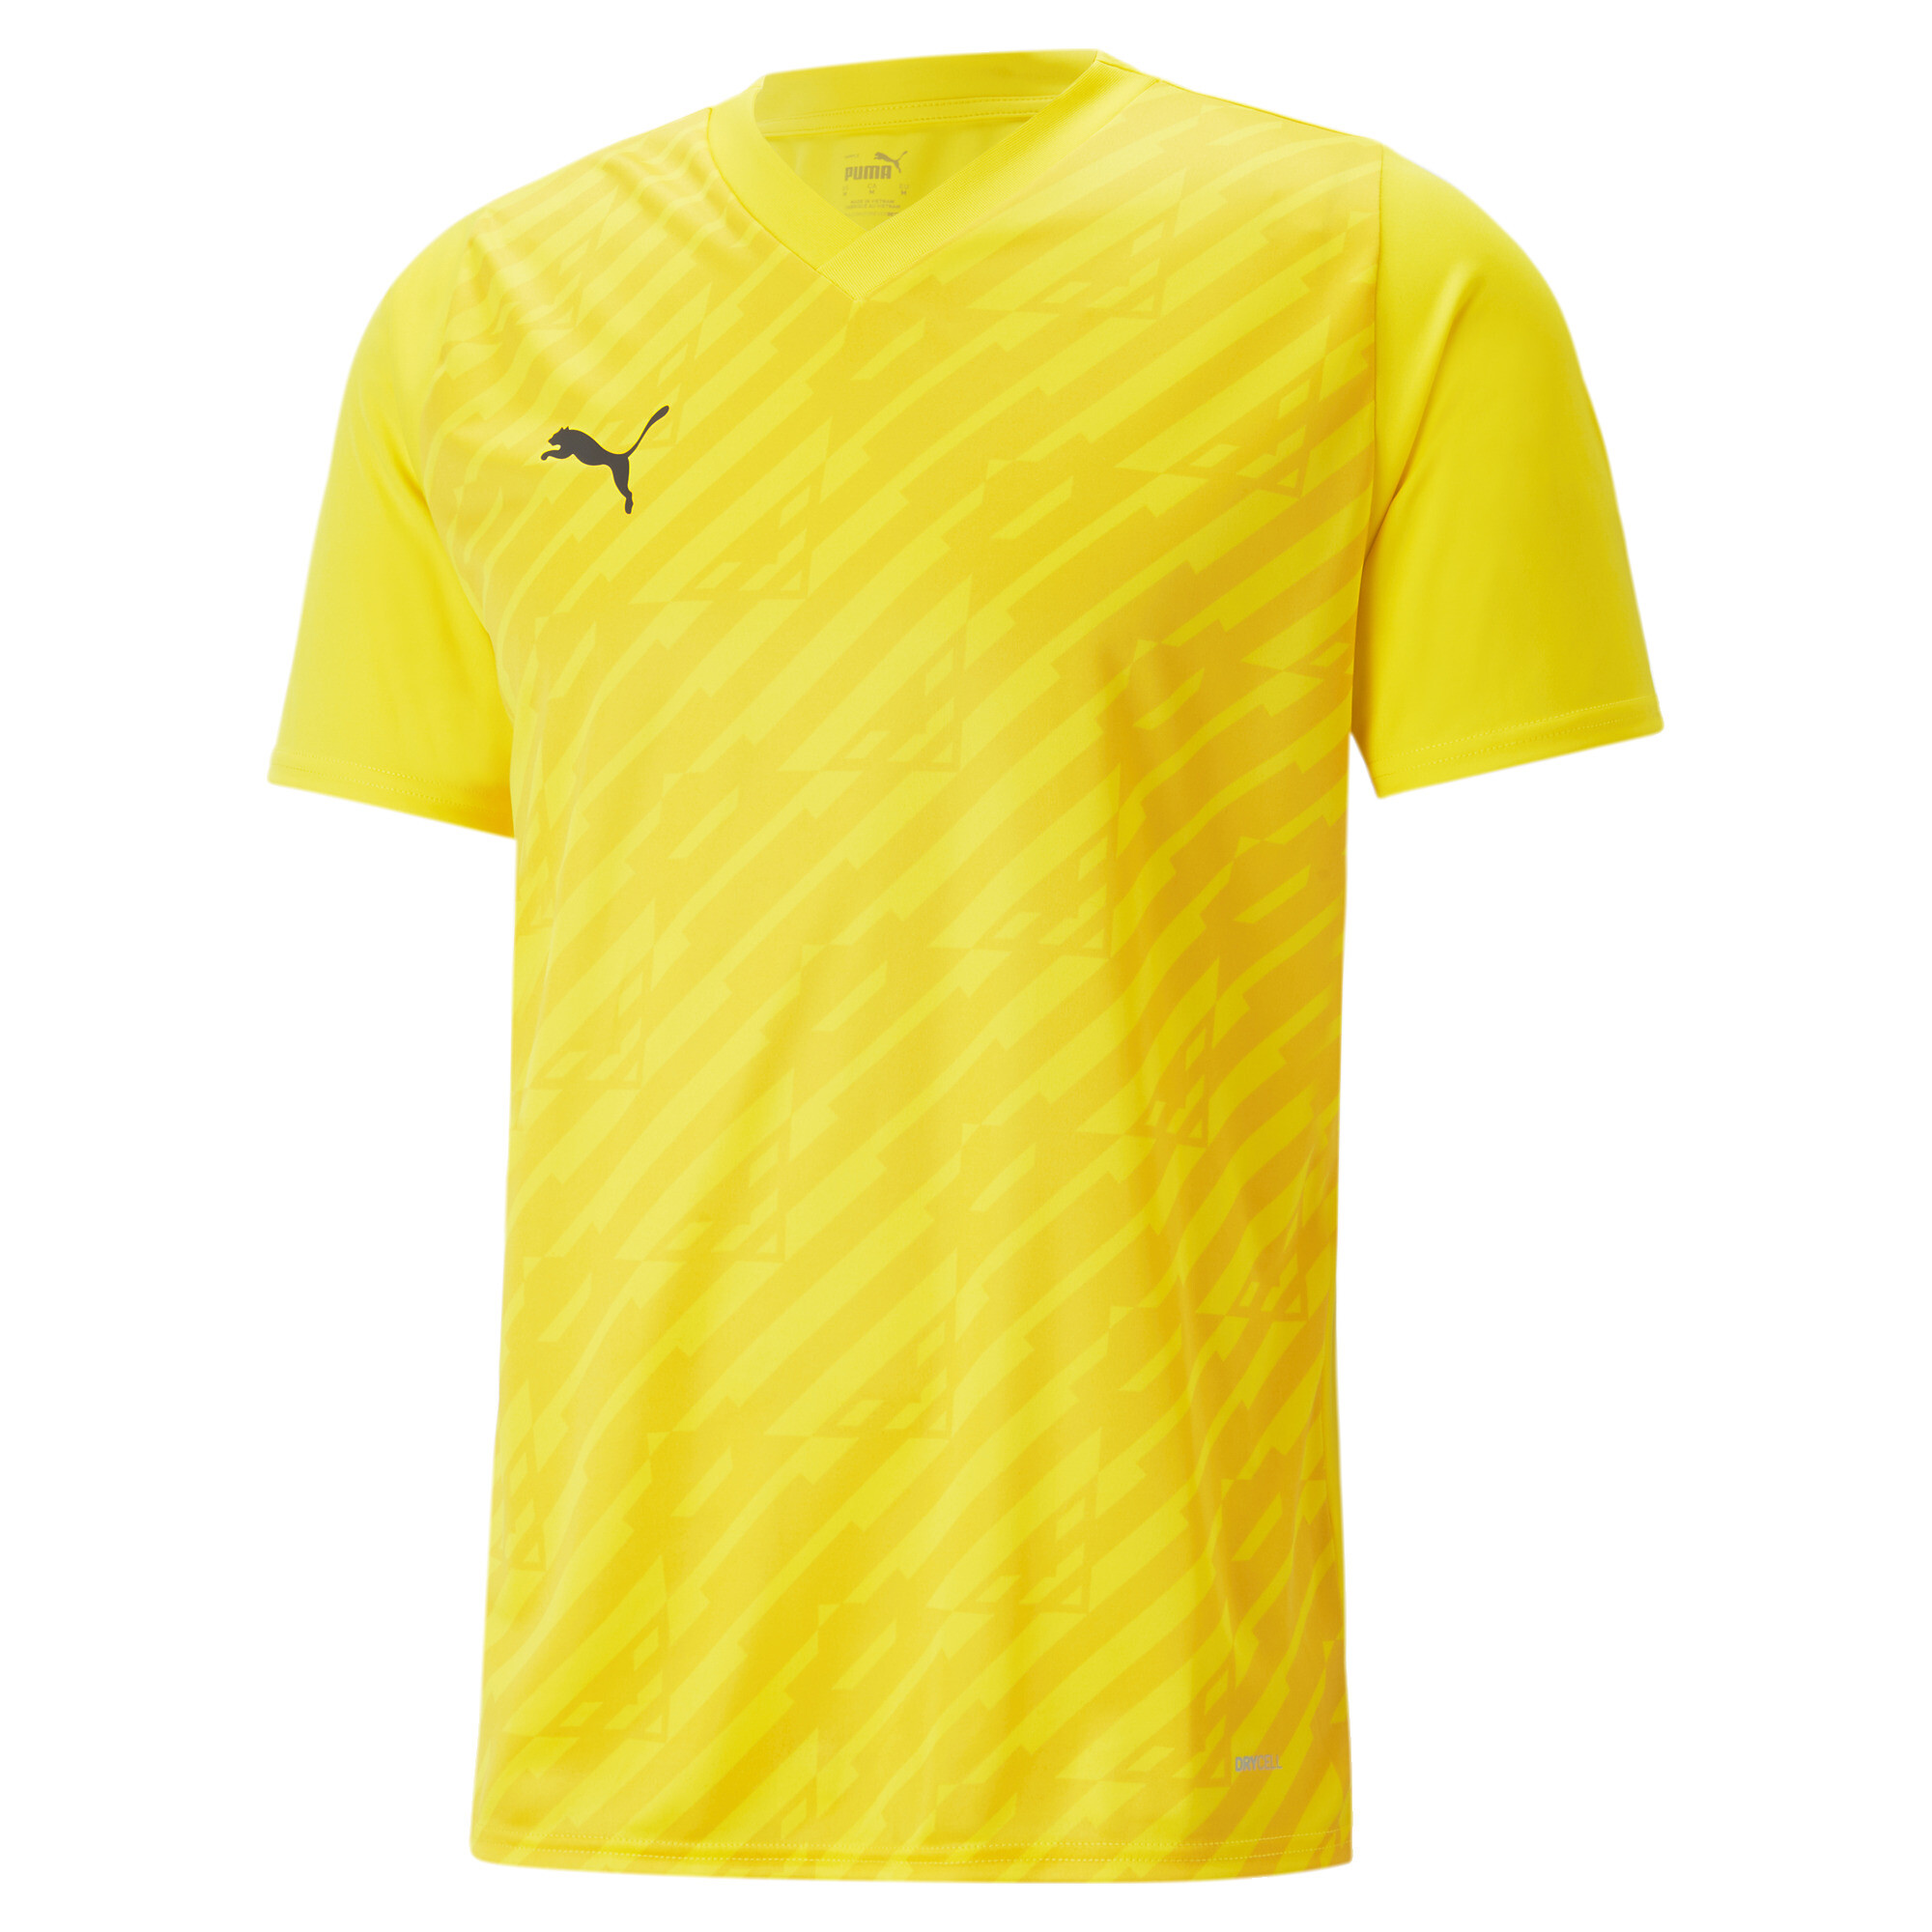 PUMA teamULTIMATE_Jersey 705371 007 CYBER YELLOW